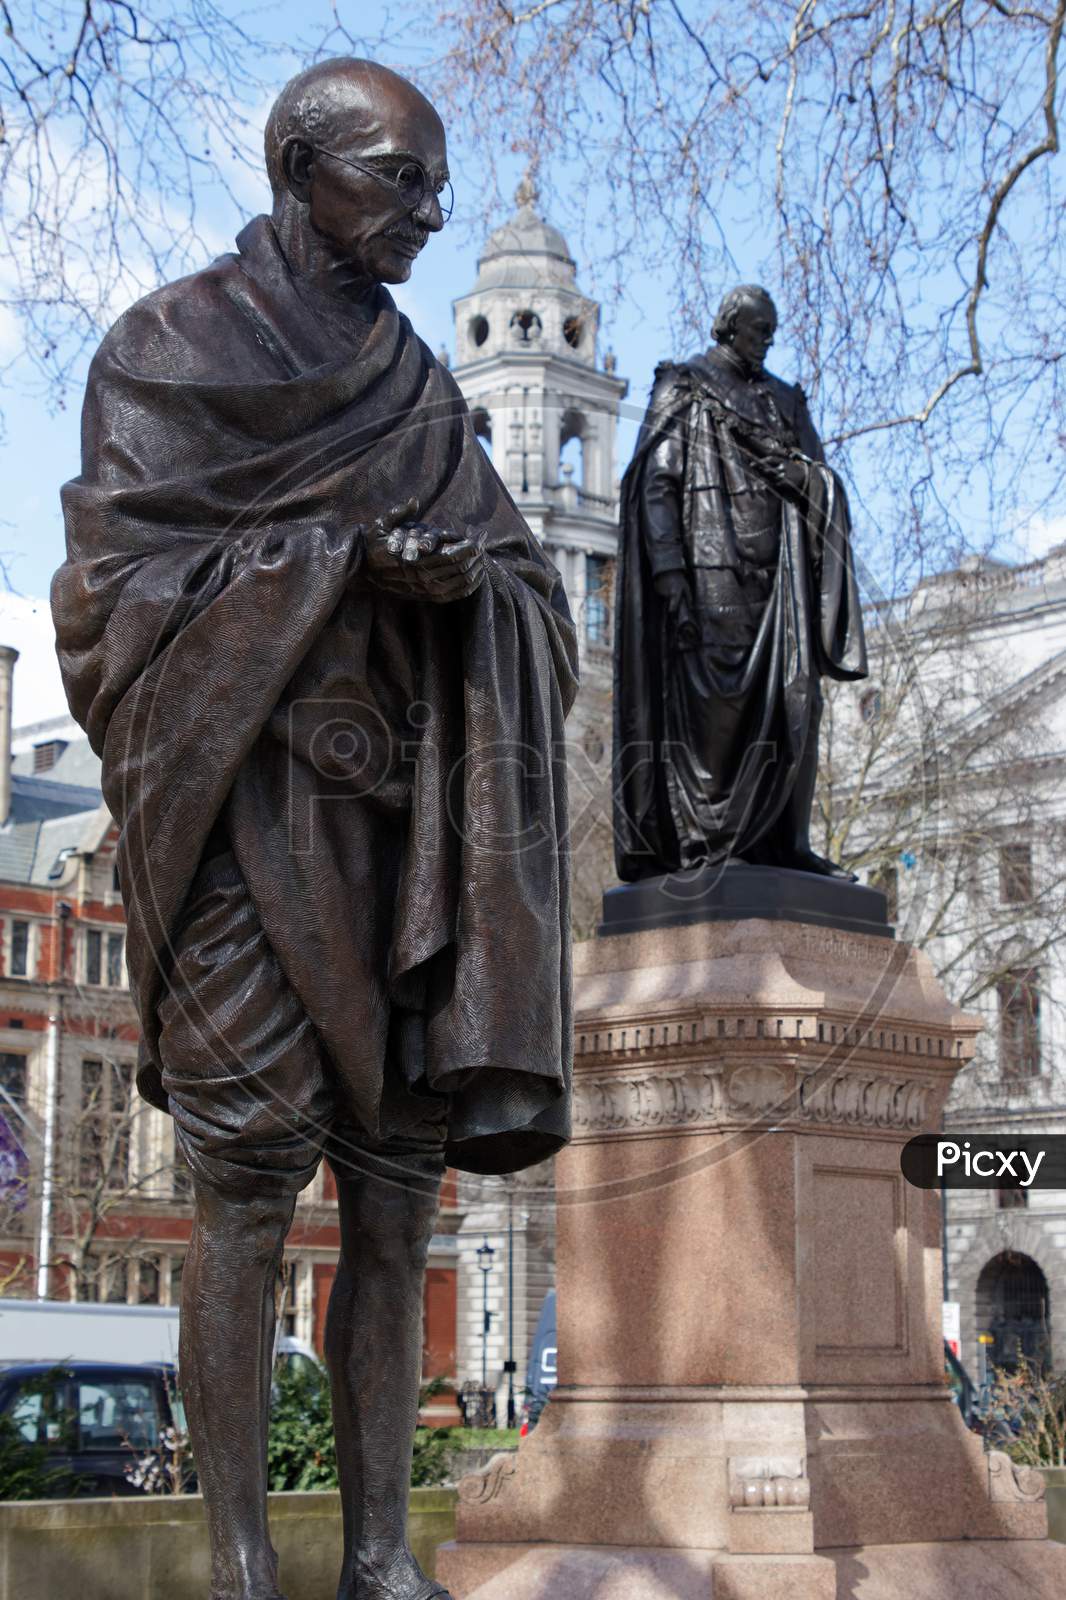 London/Uk - March 21 : Monument To Mahatma Gandhi In London On March 21, 2018